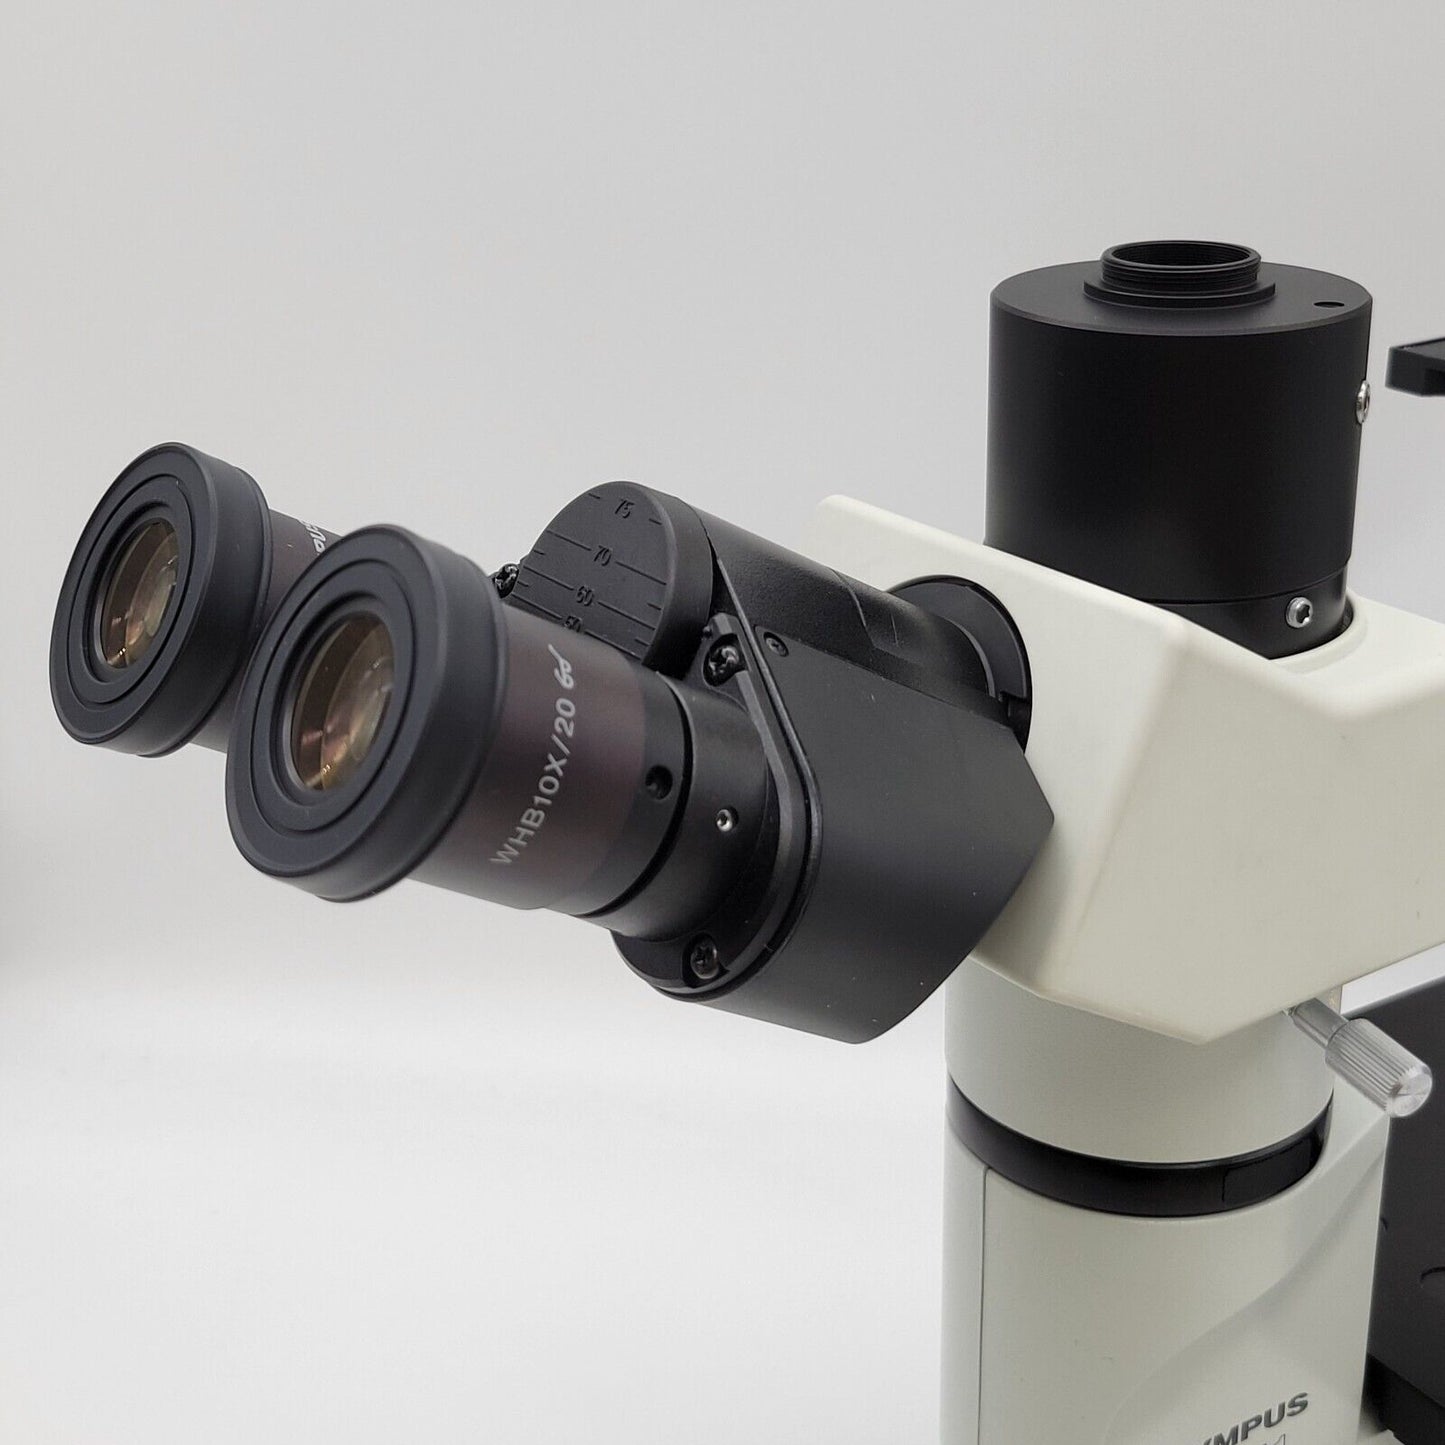 Olympus Microscope CKX41 with Phase Contrast & Trinocular Head | Tissue Culture - microscopemarketplace